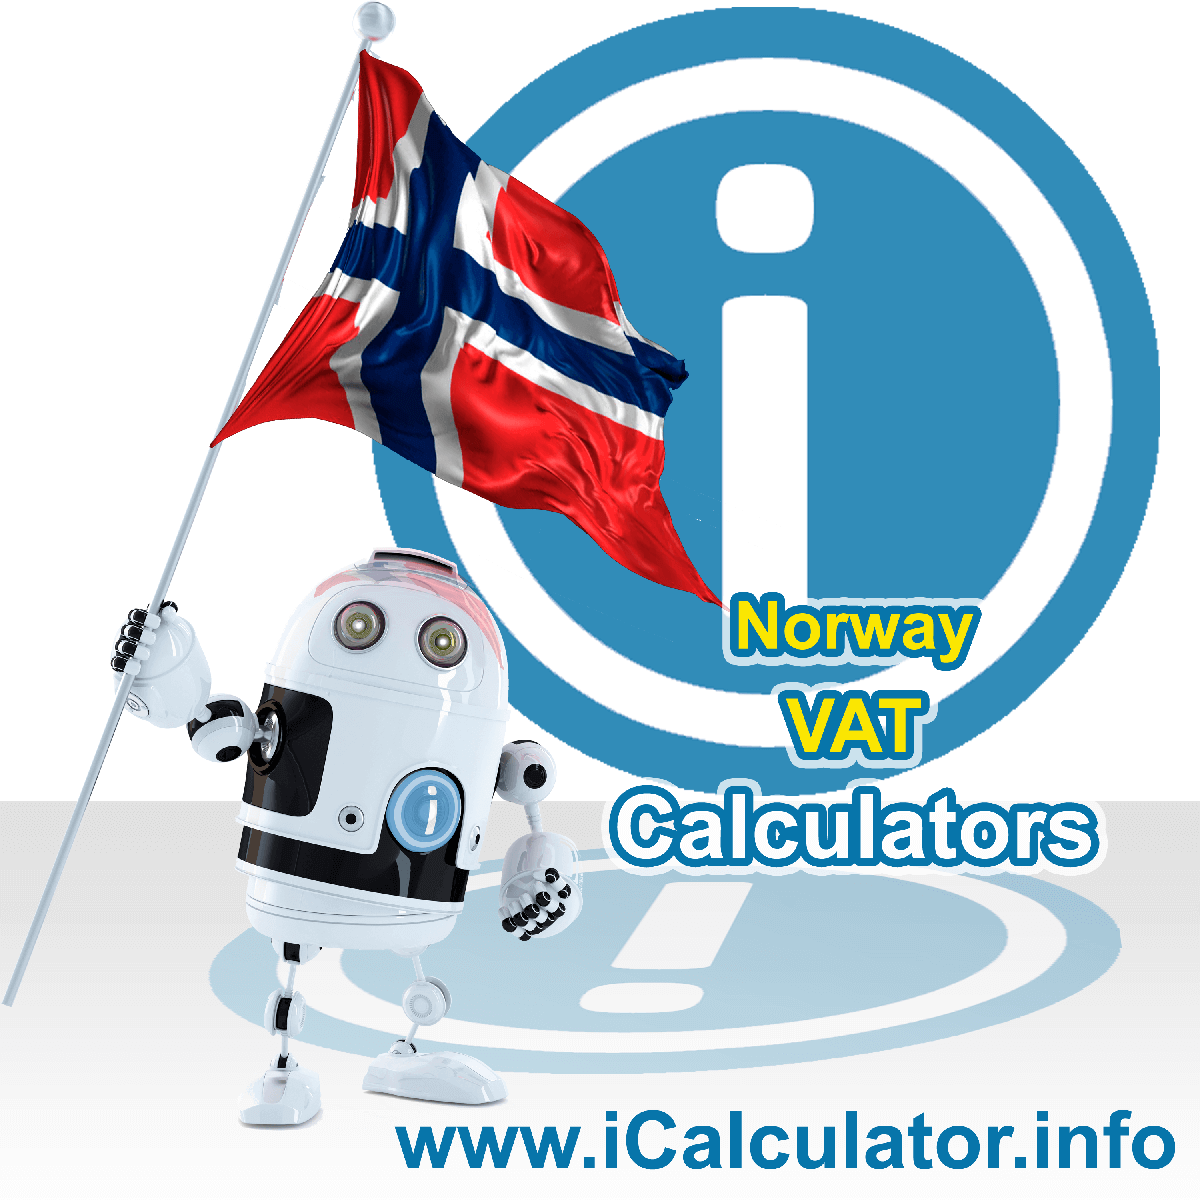 Norway VAT Calculator. This image shows the Norway flag and information relating to the VAT formula used for calculating Value Added Tax in Norway using the Norway VAT Calculator in 2023